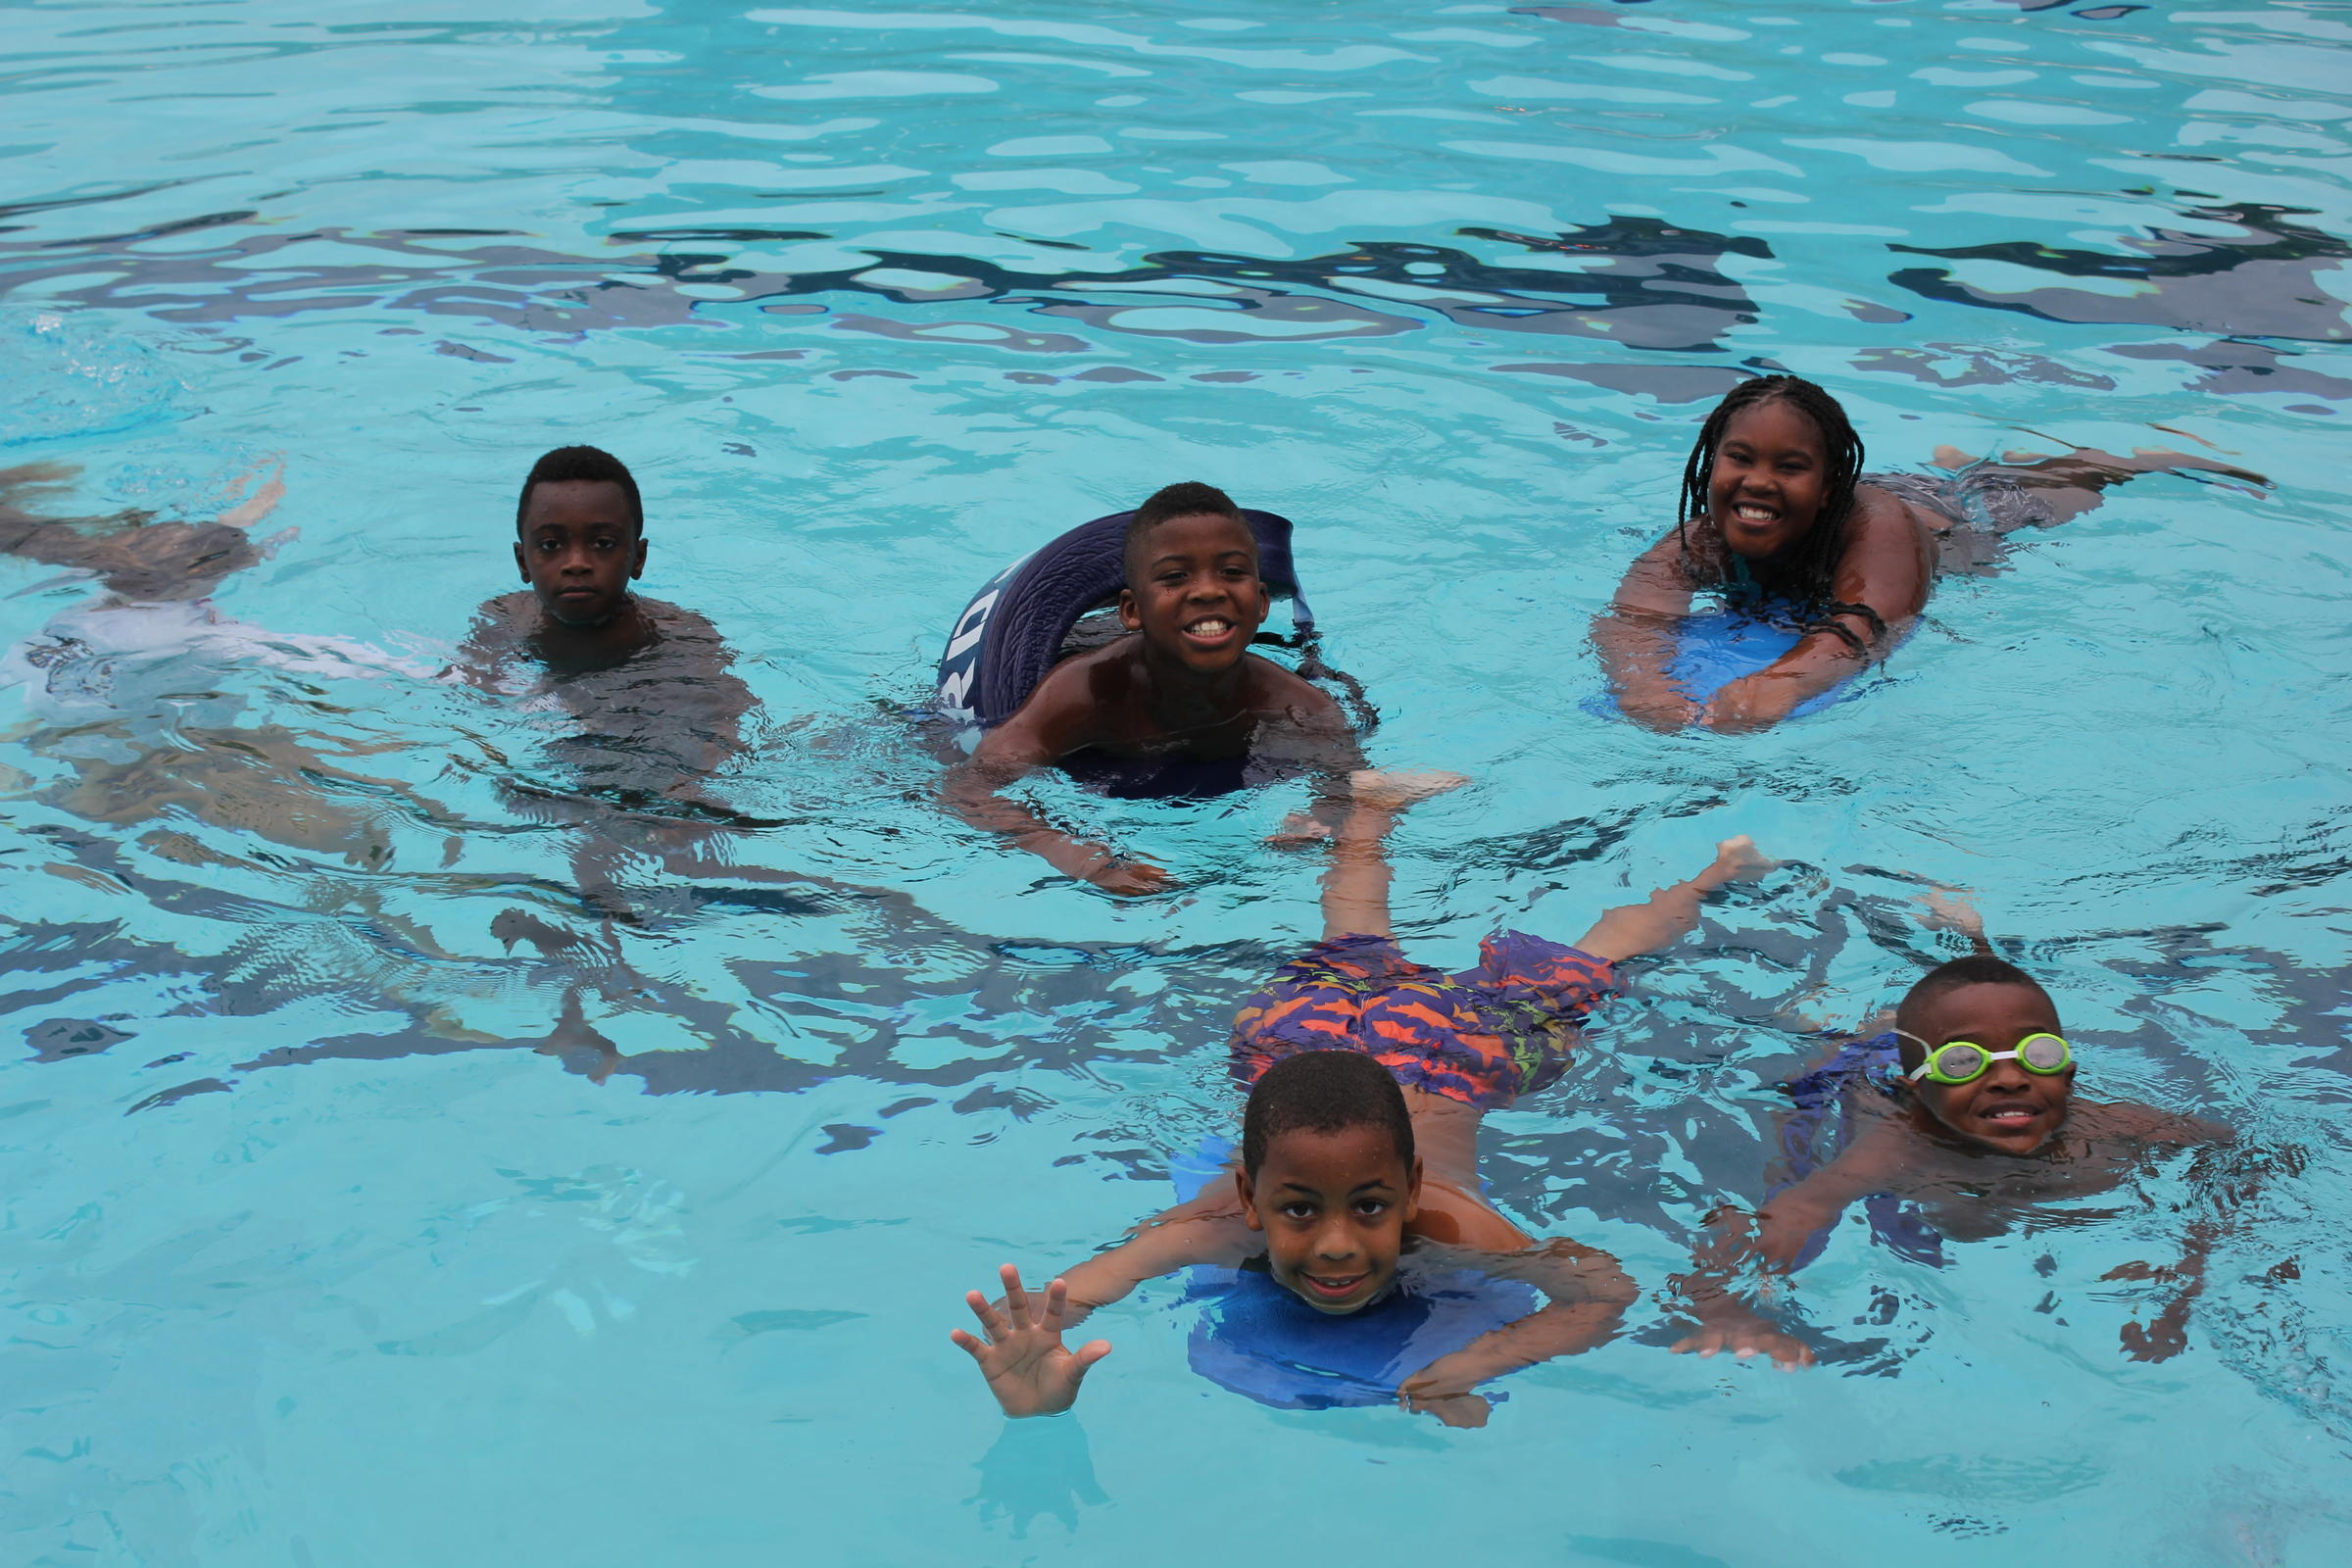 10 Ways to Protect Kids From Accidental Drowning